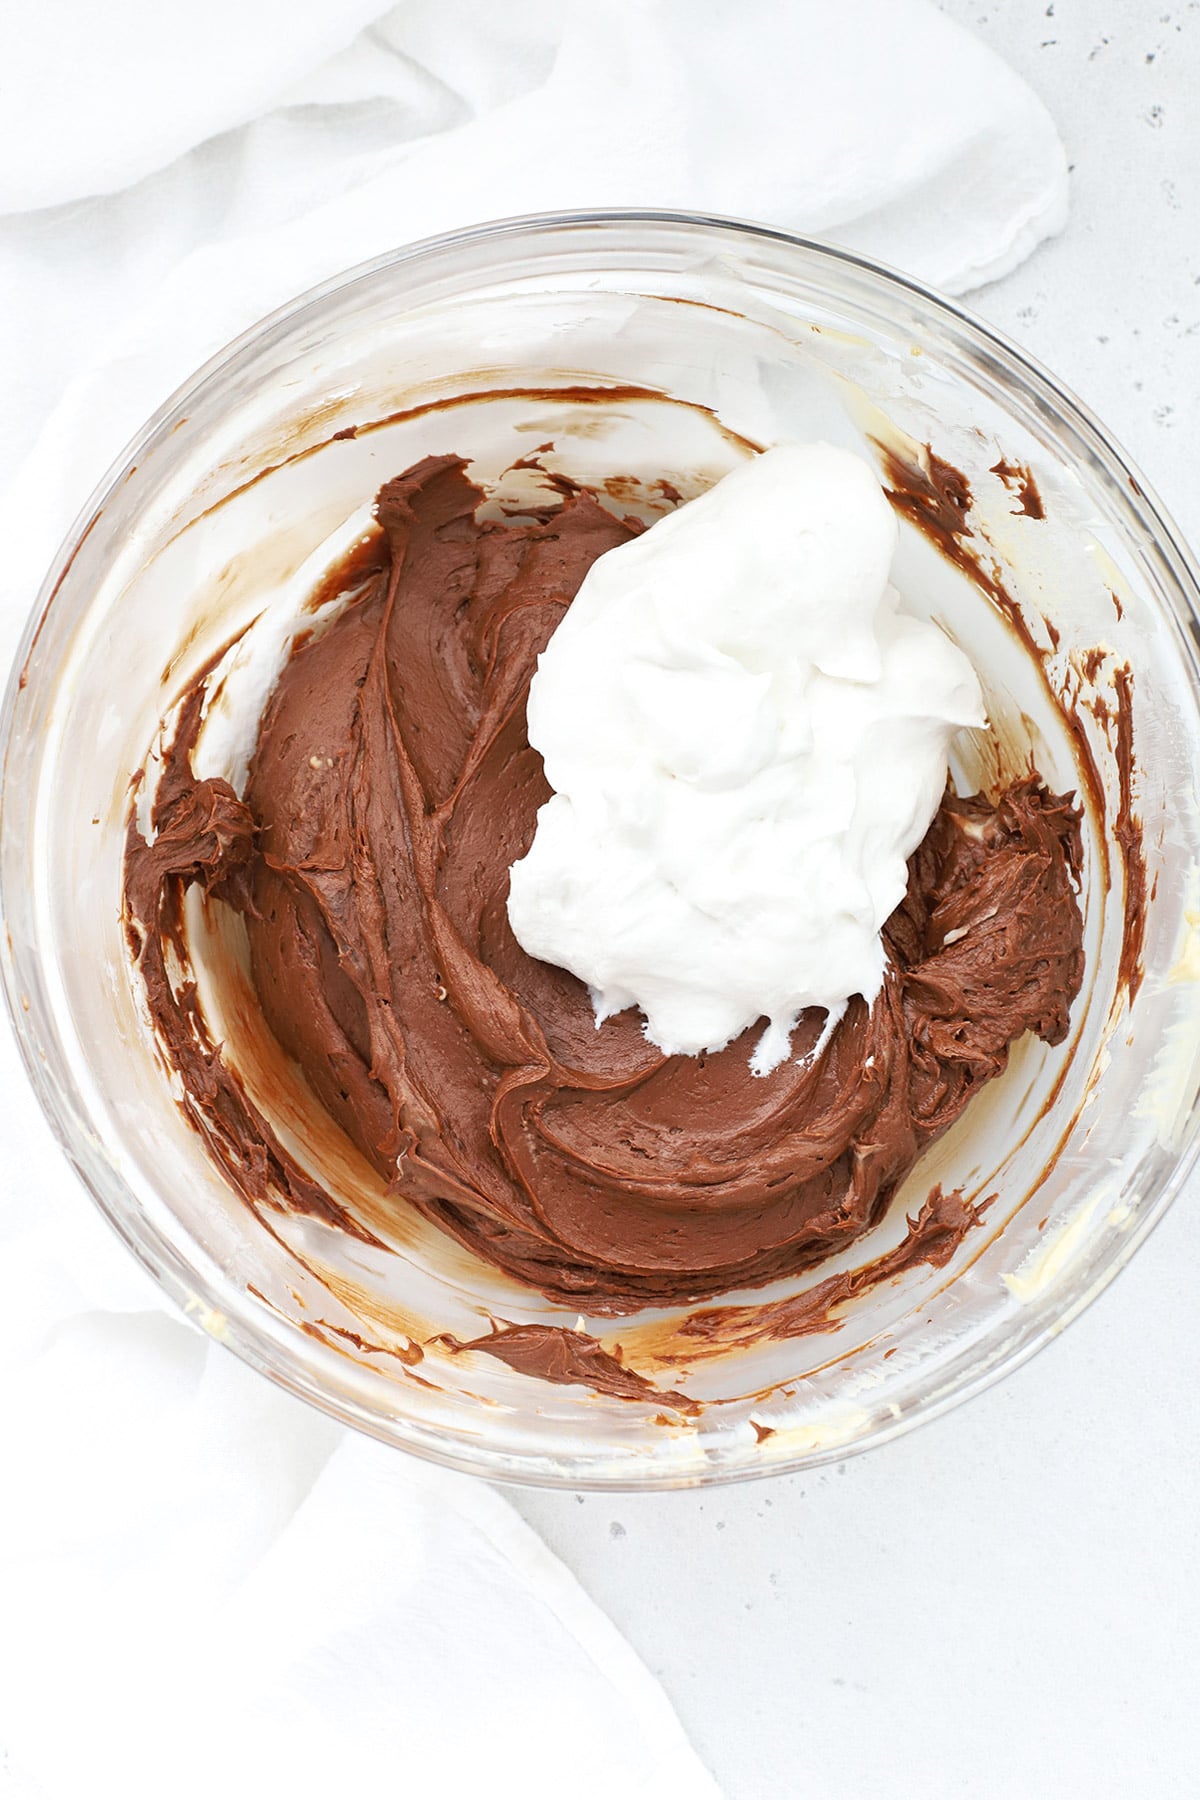 Adding whipped topping to no bake chocolate cheesecake filling